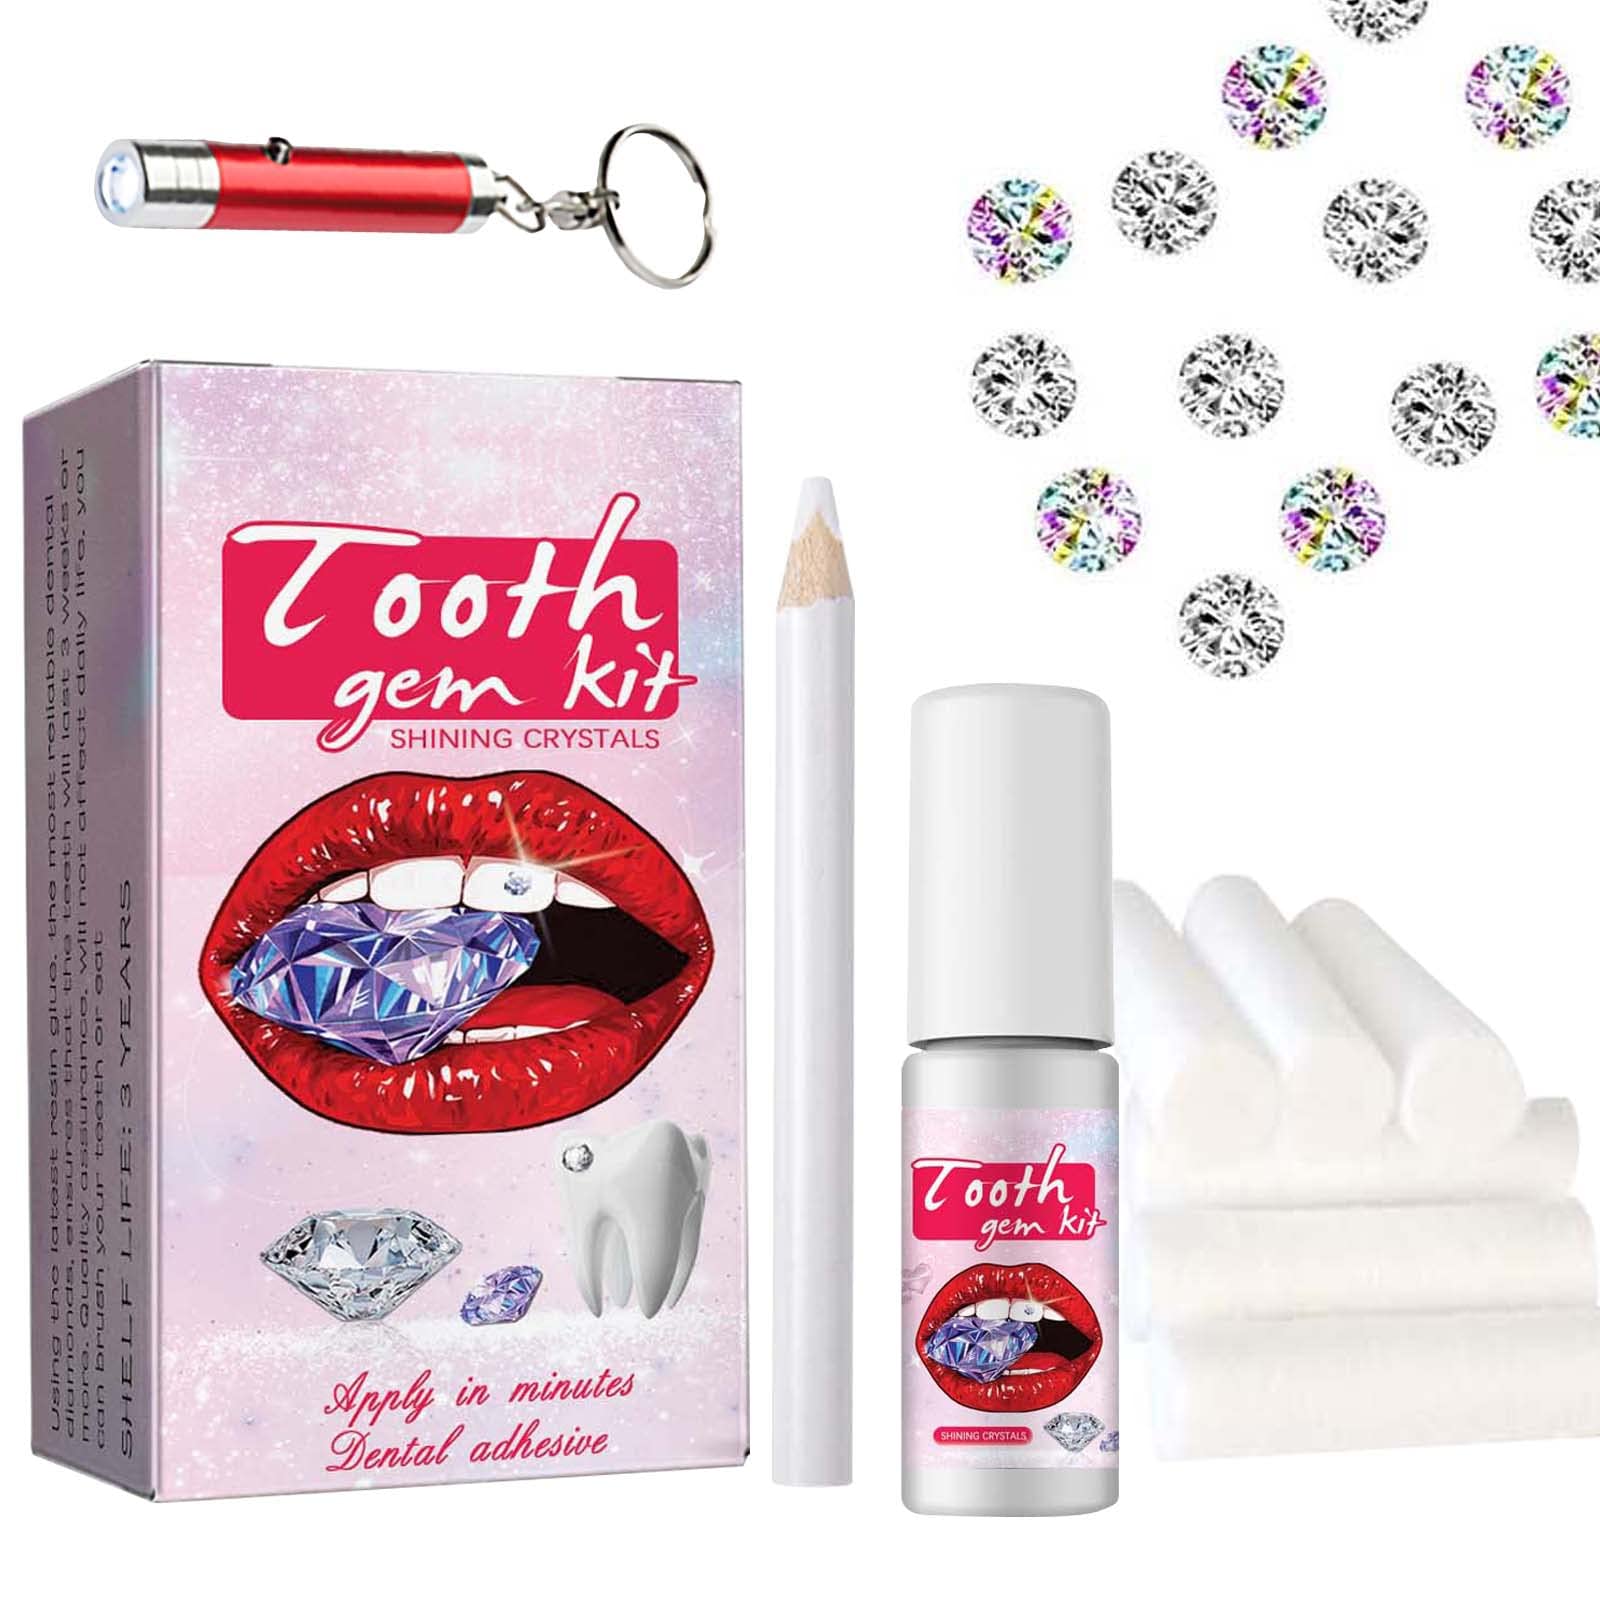 Tooth Gems Kit For Teeth With Teeth Gems And Tooth Gem Glue,Dental Curing  Light,Crystal Gems,These Are DIY Tooth Gems Crystals Starter Essential  Teeth